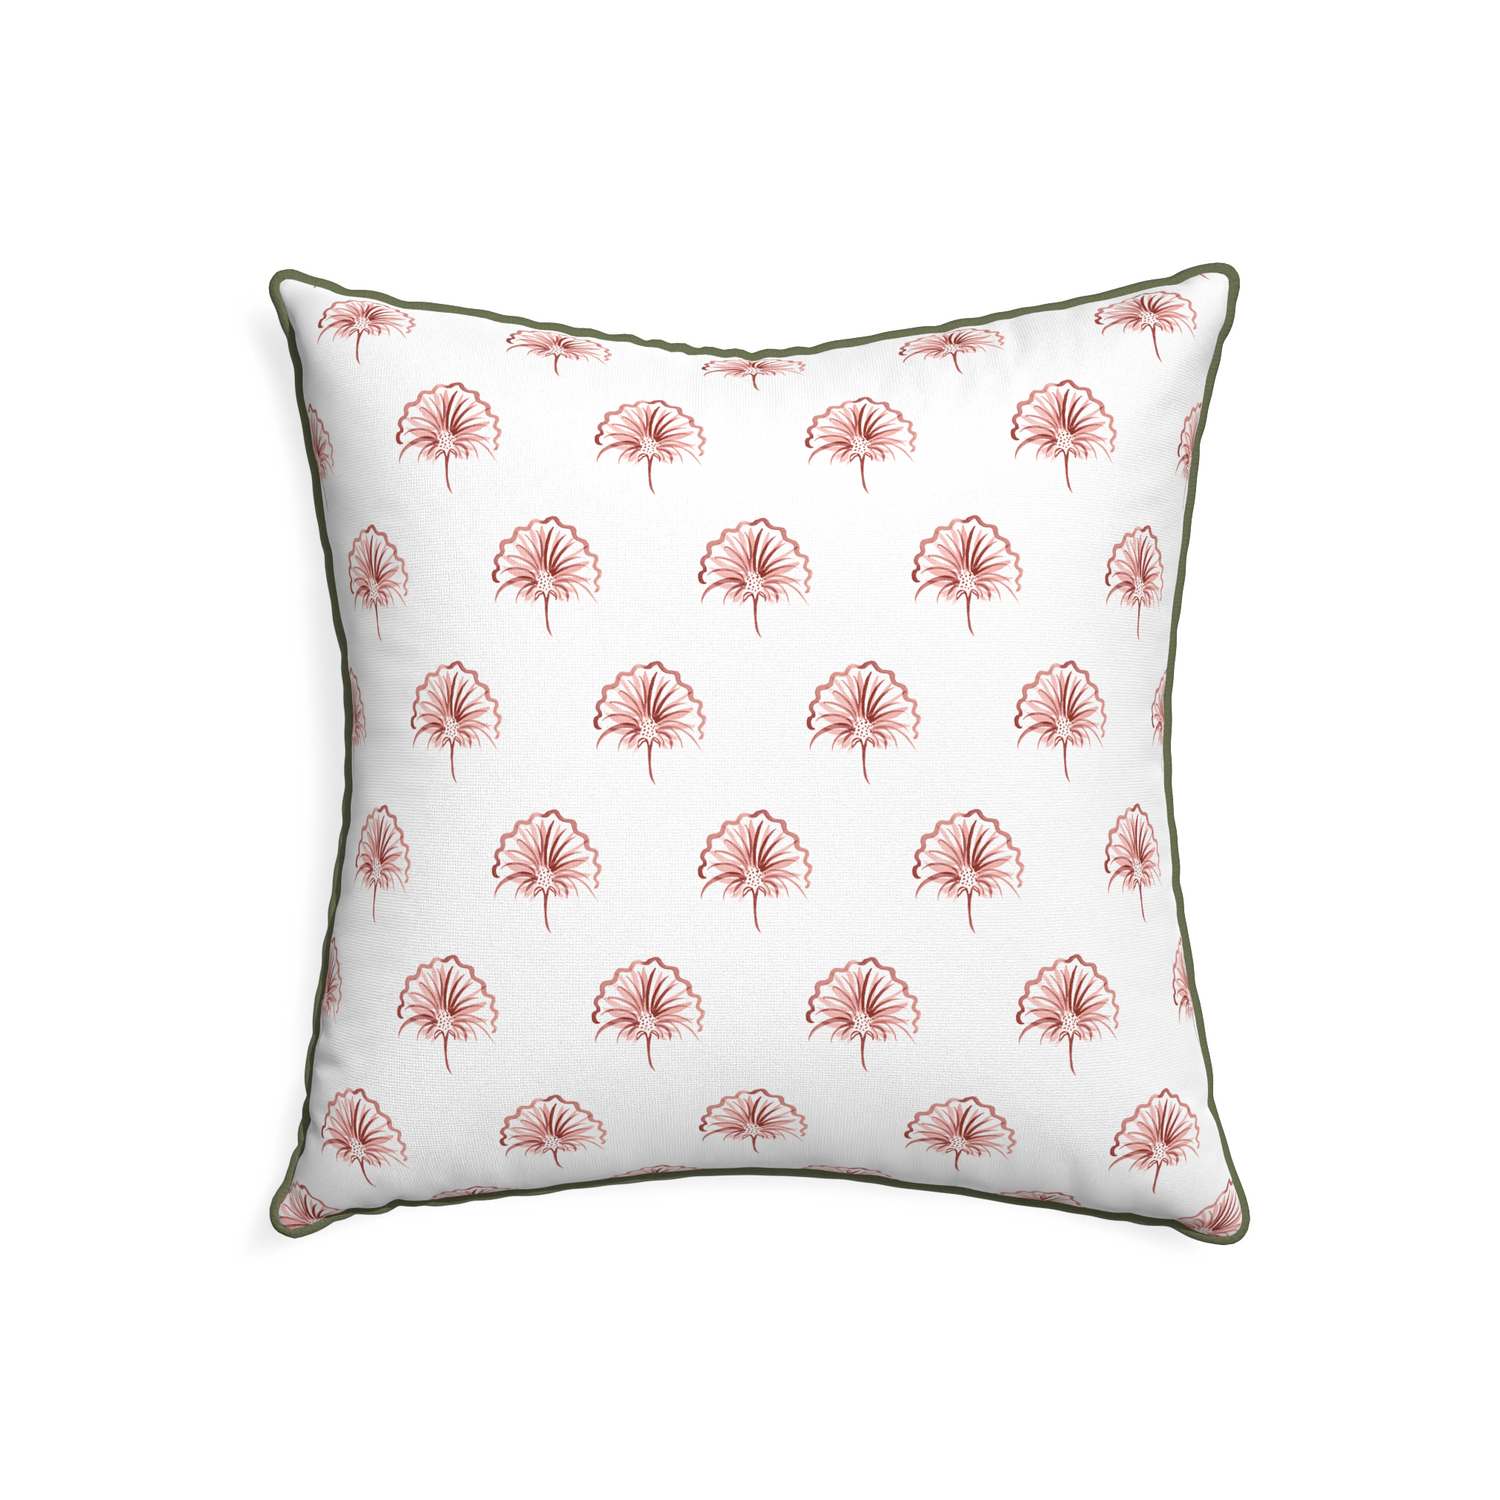 22-square penelope rose custom pillow with f piping on white background